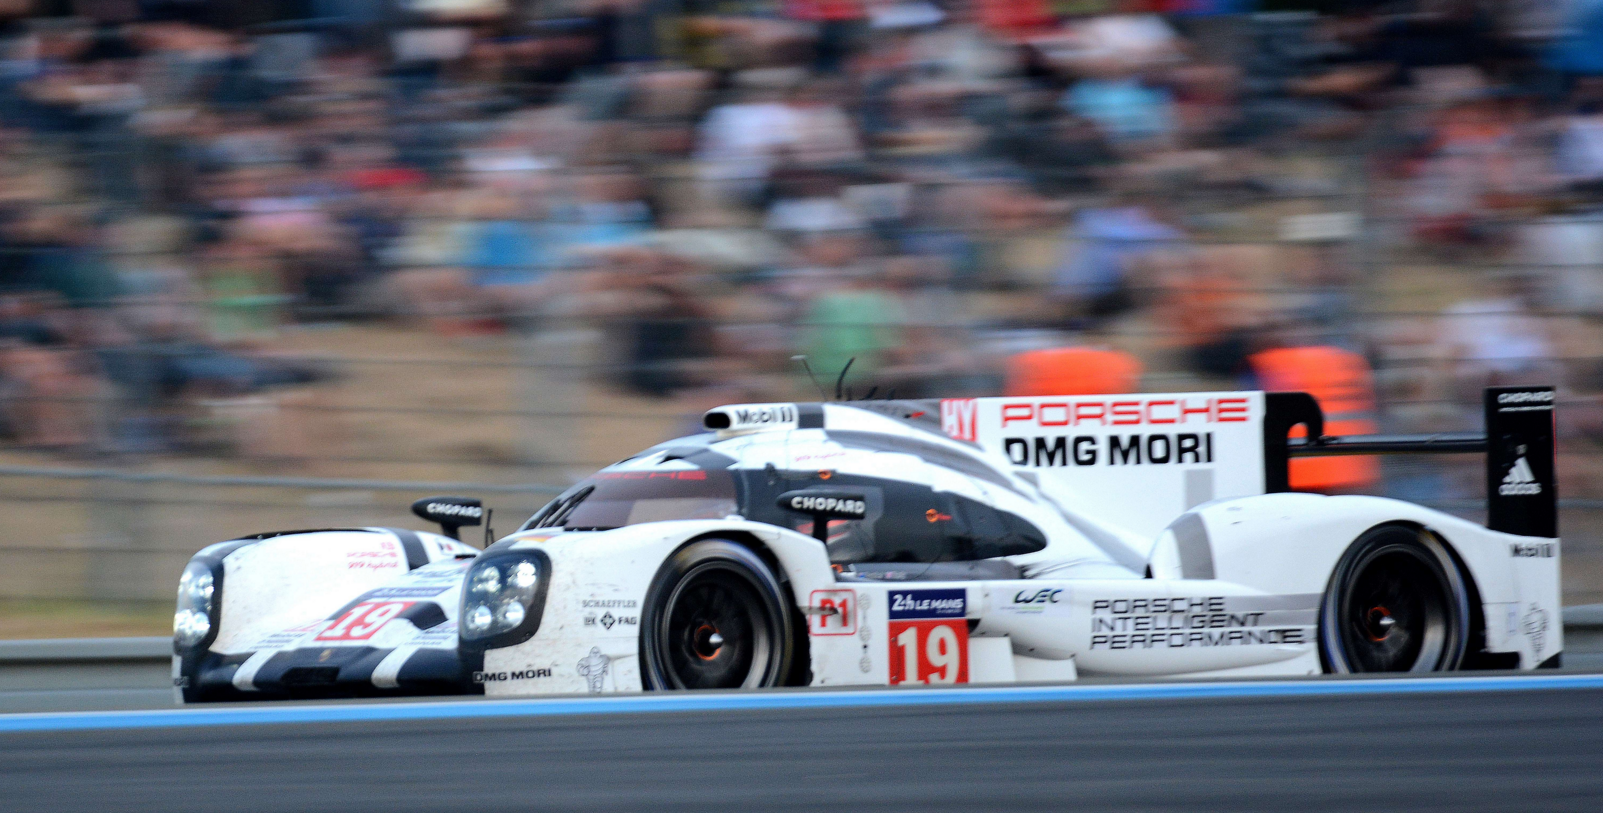 A Documentary on the 2015 Le Mans 24 Hours Is Coming to Amazon Prime